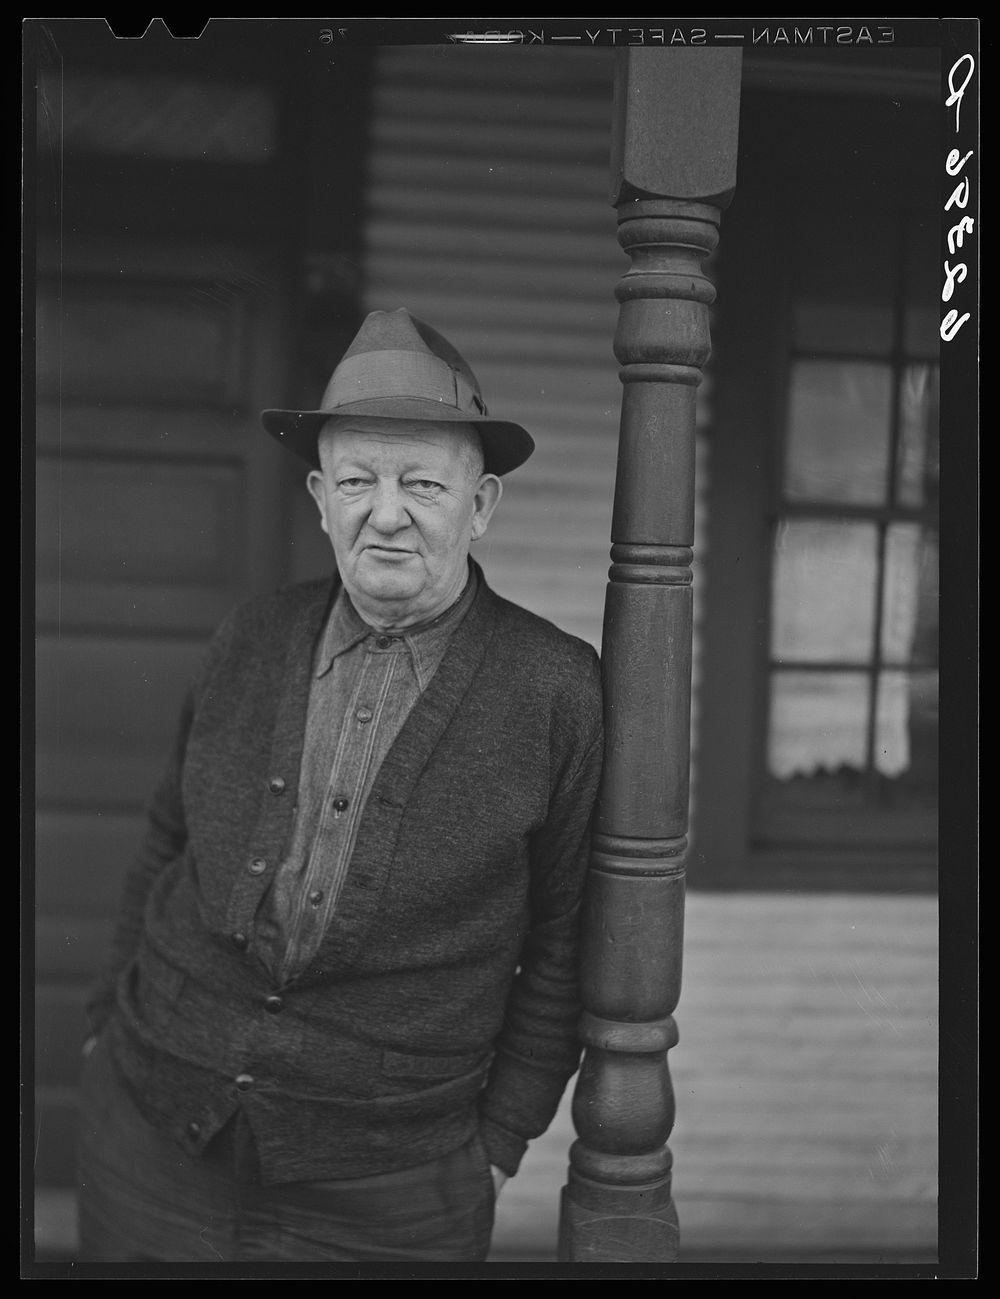 Steelworker. Midland, Pennsylvania. Sourced from the Library of Congress.